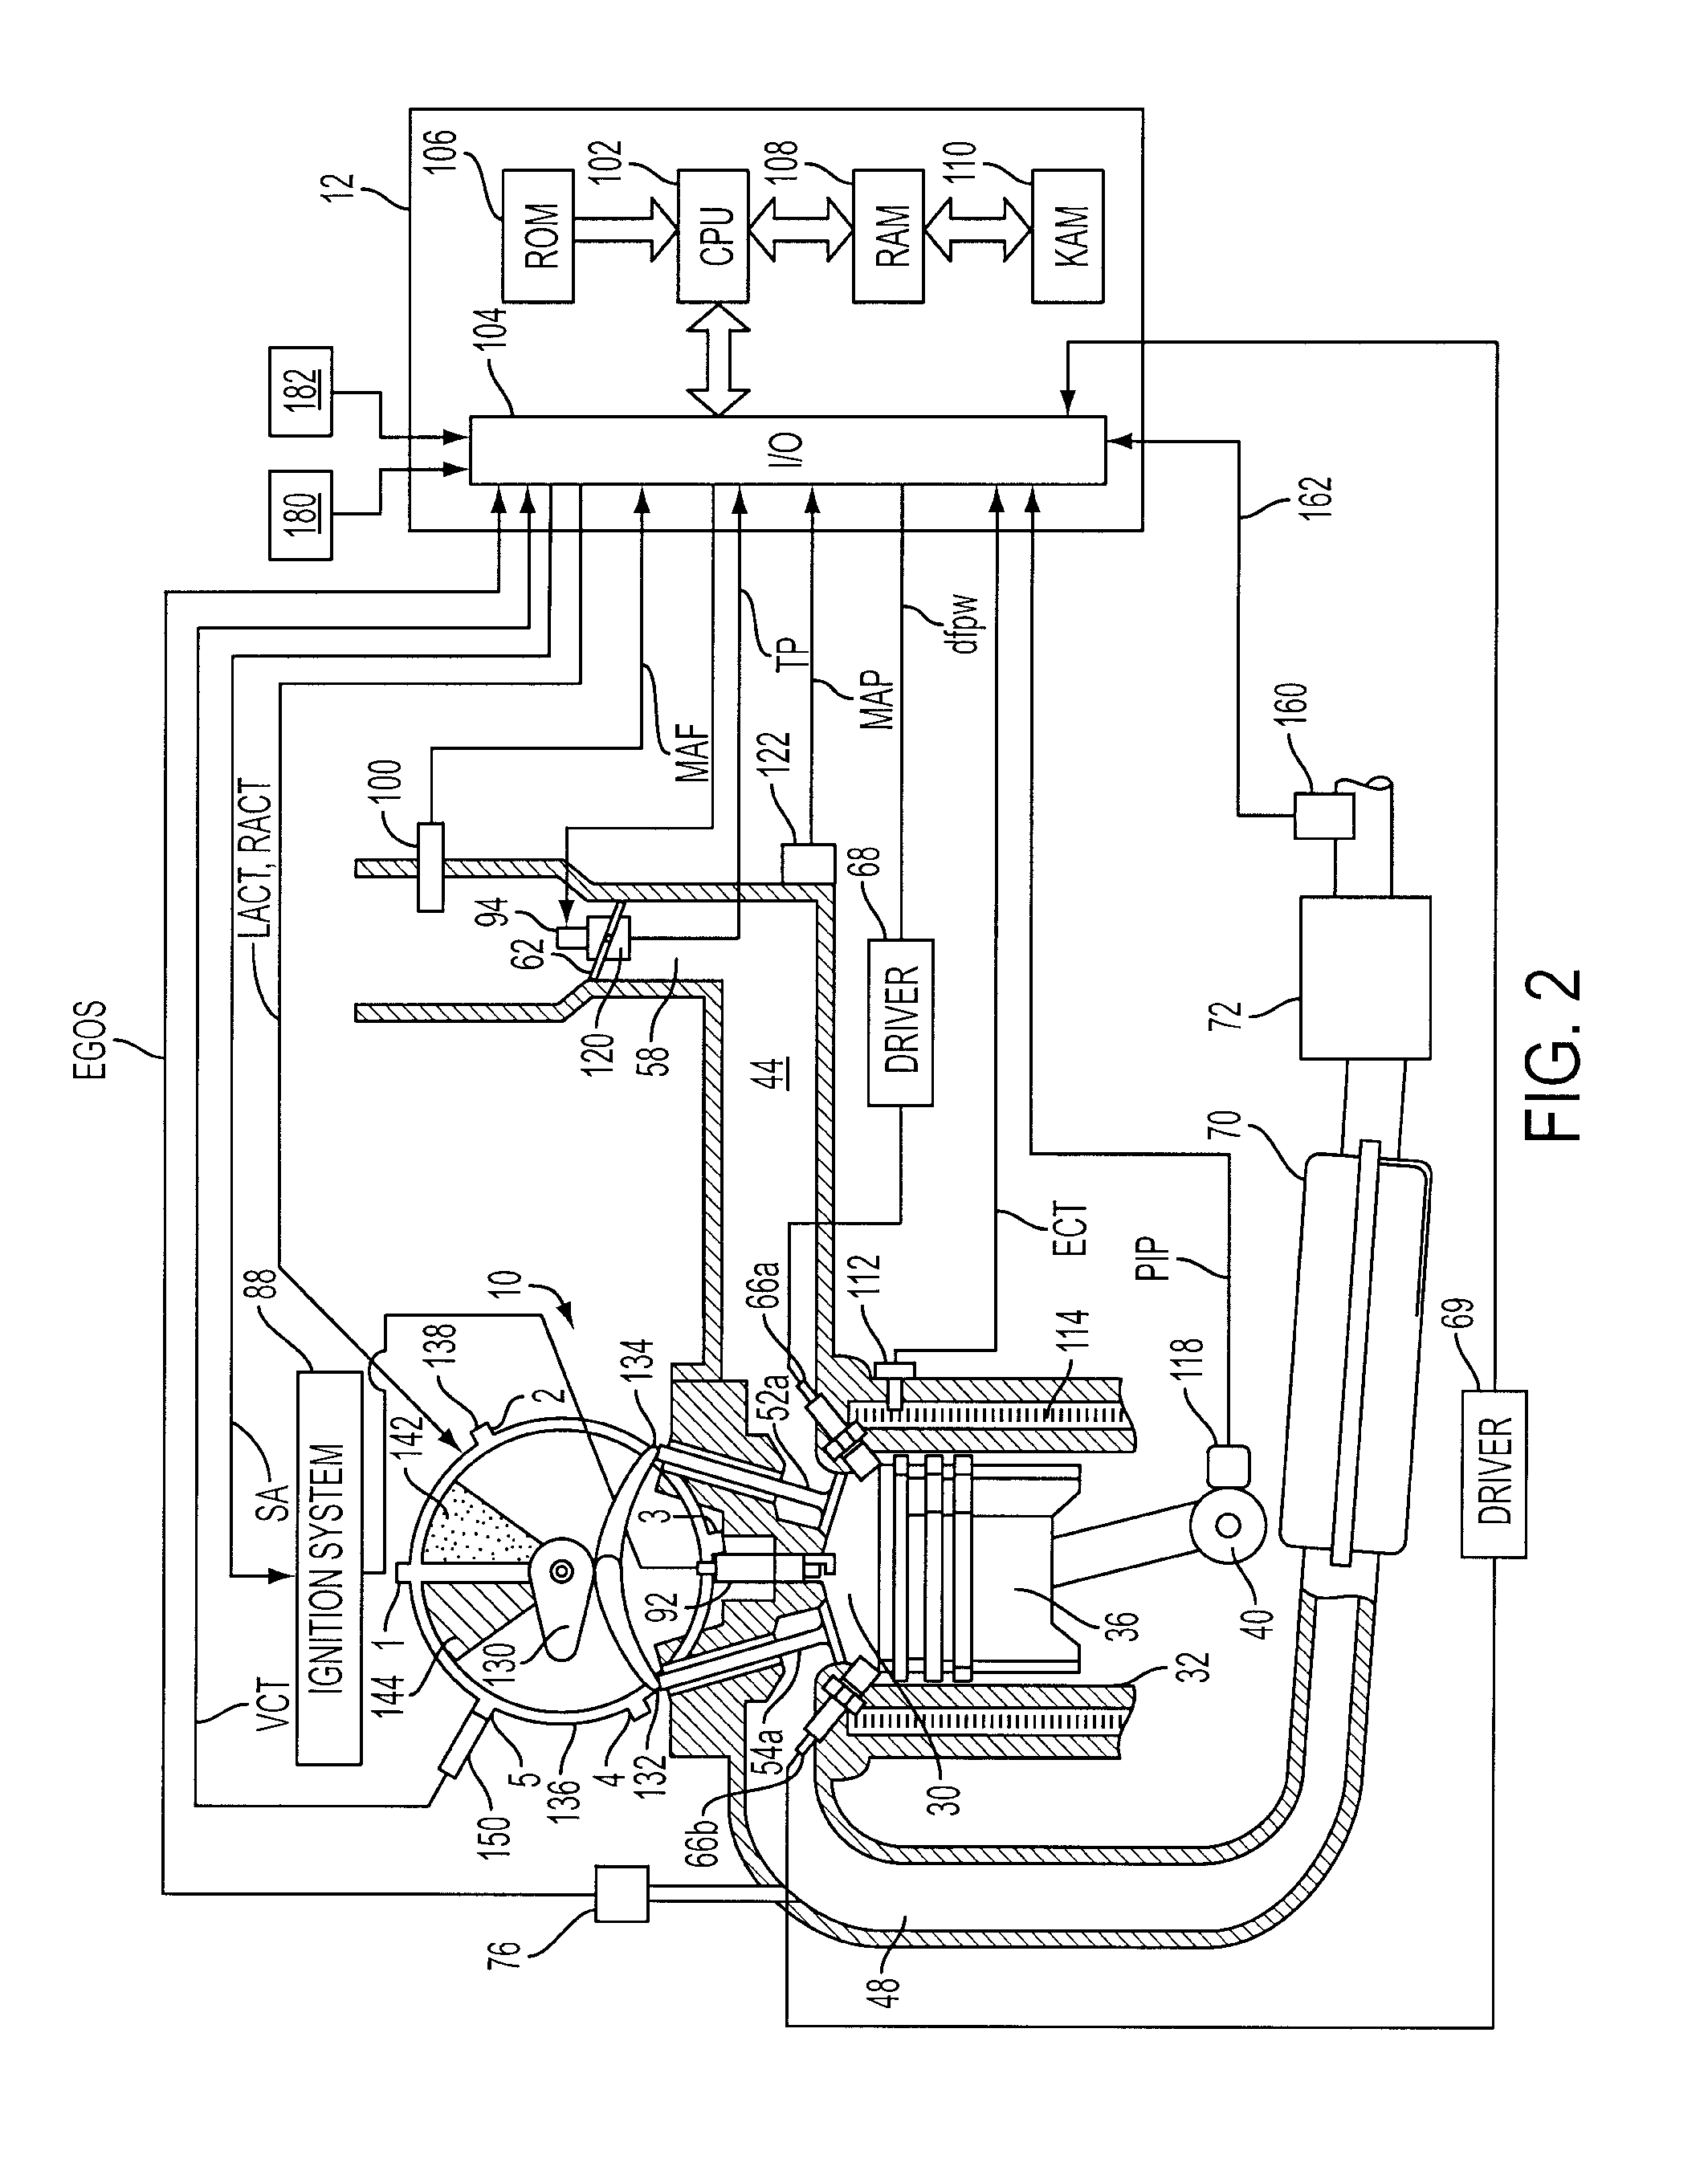 Directly injected internal combustion engine system